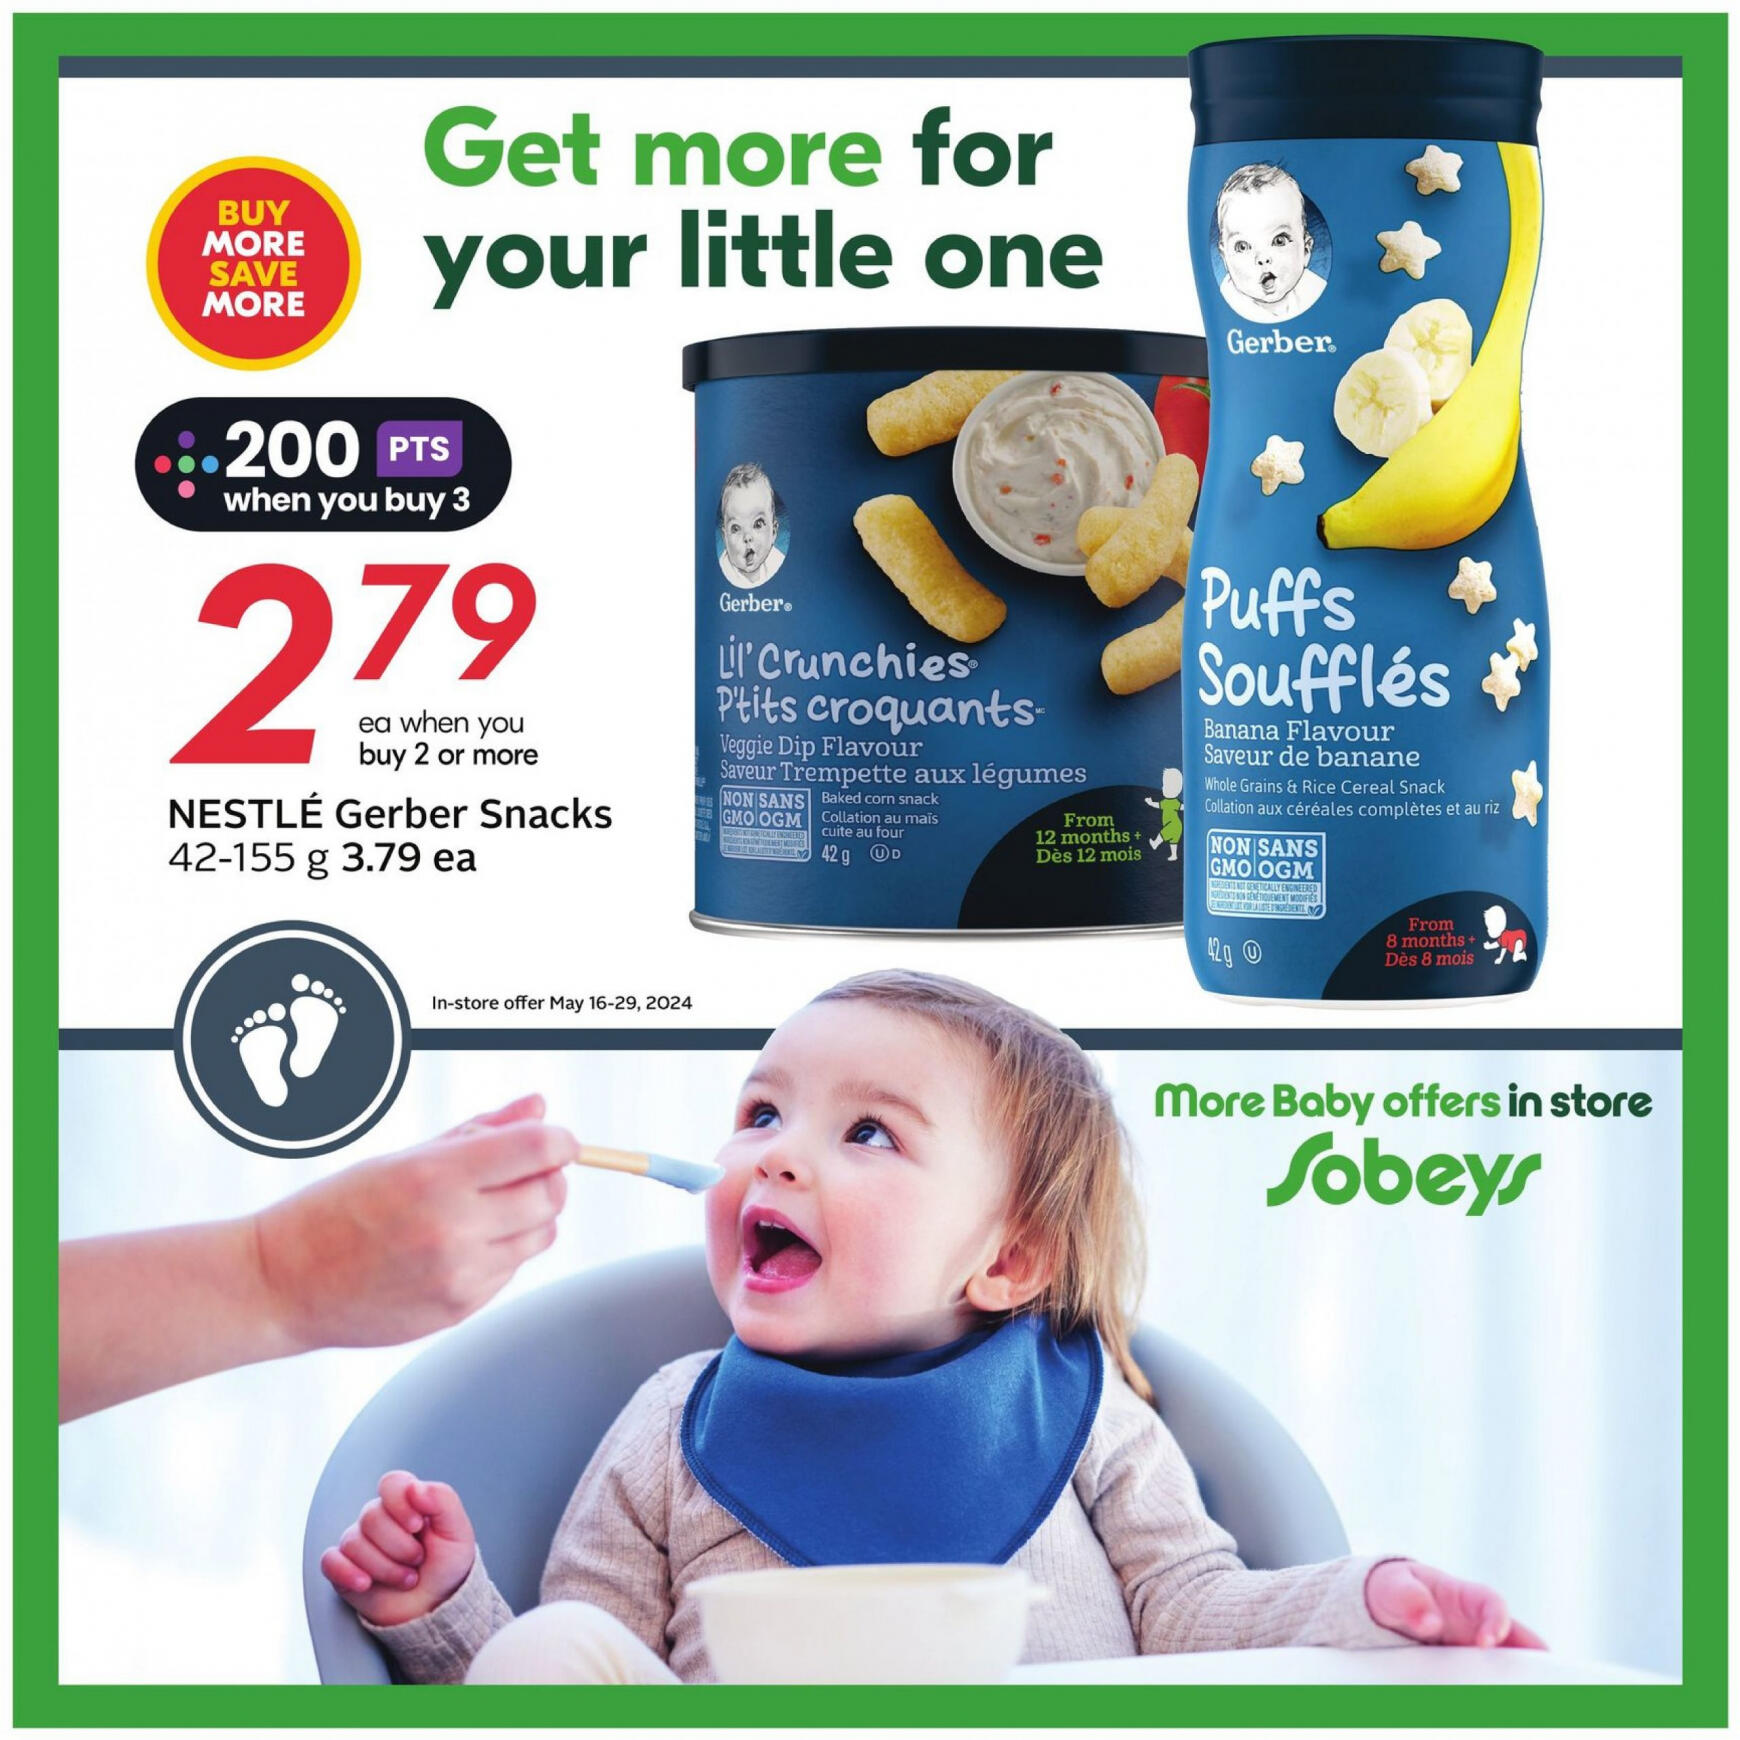 sobeys - Sobeys - Weekly Flyer - Ontario flyer current 16.05. - 22.05. - page: 20